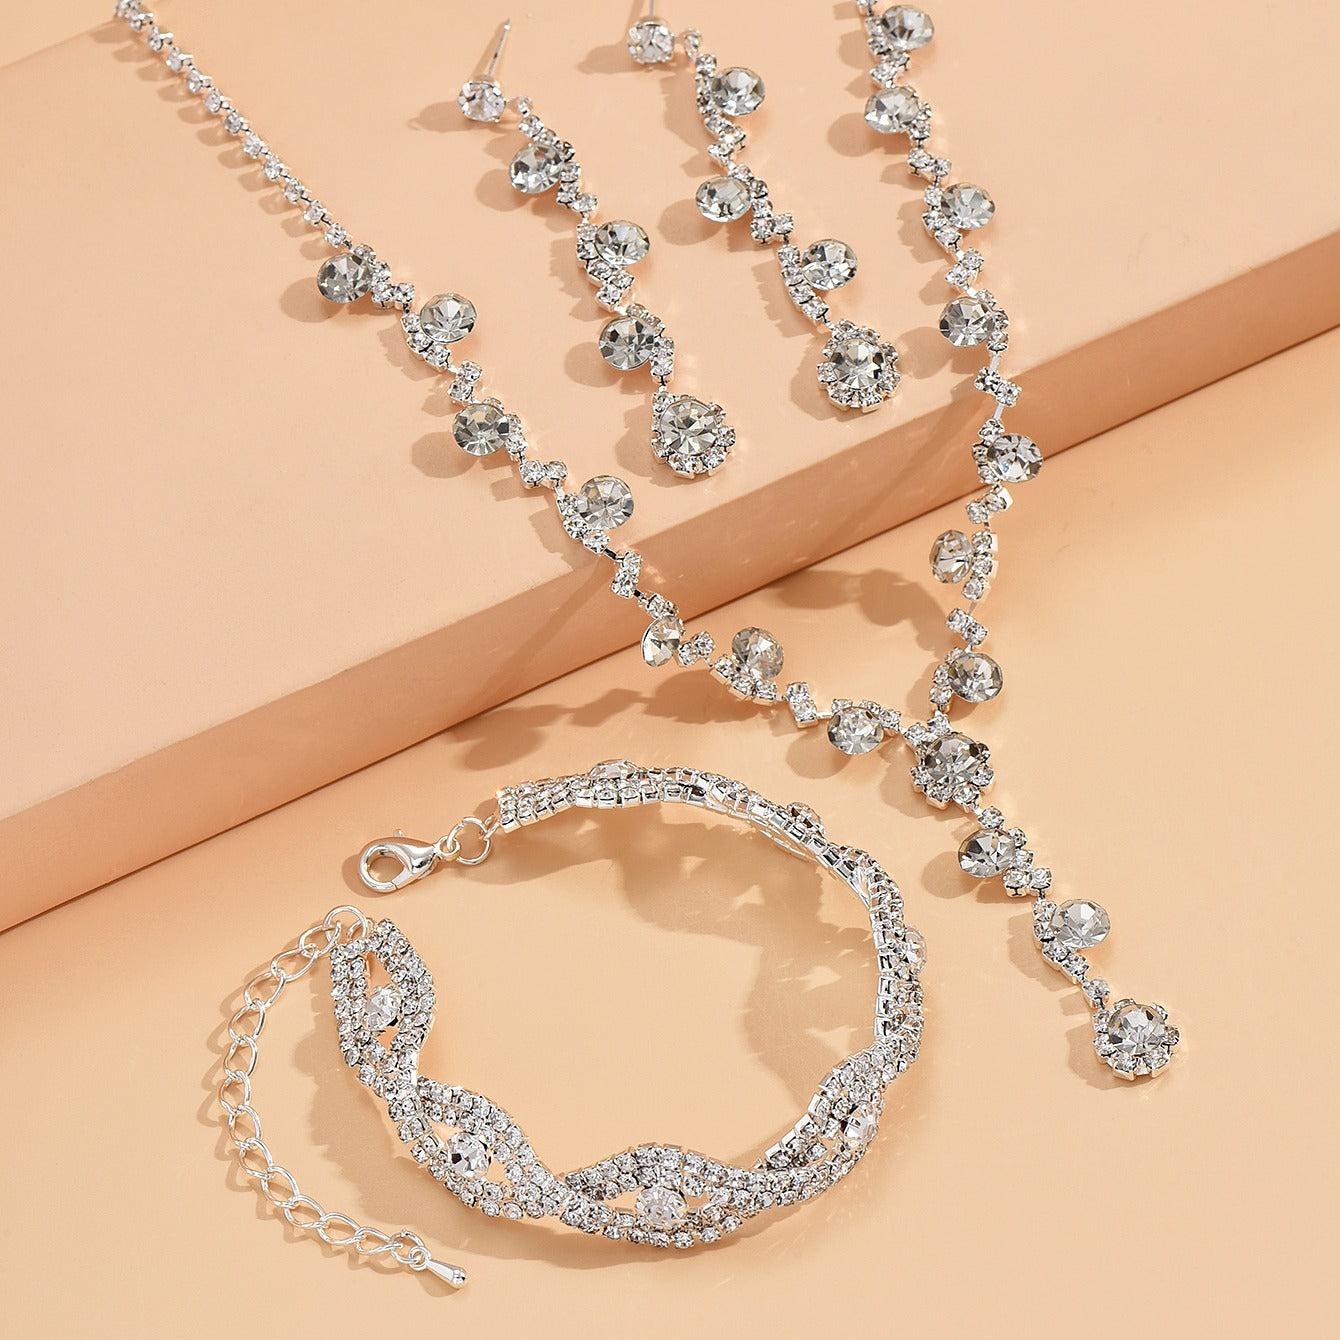 Shine Bright Like a Diamond with our Rhinestone Flower Jewelry Set - Perfect for Brides and Bridesmaids!